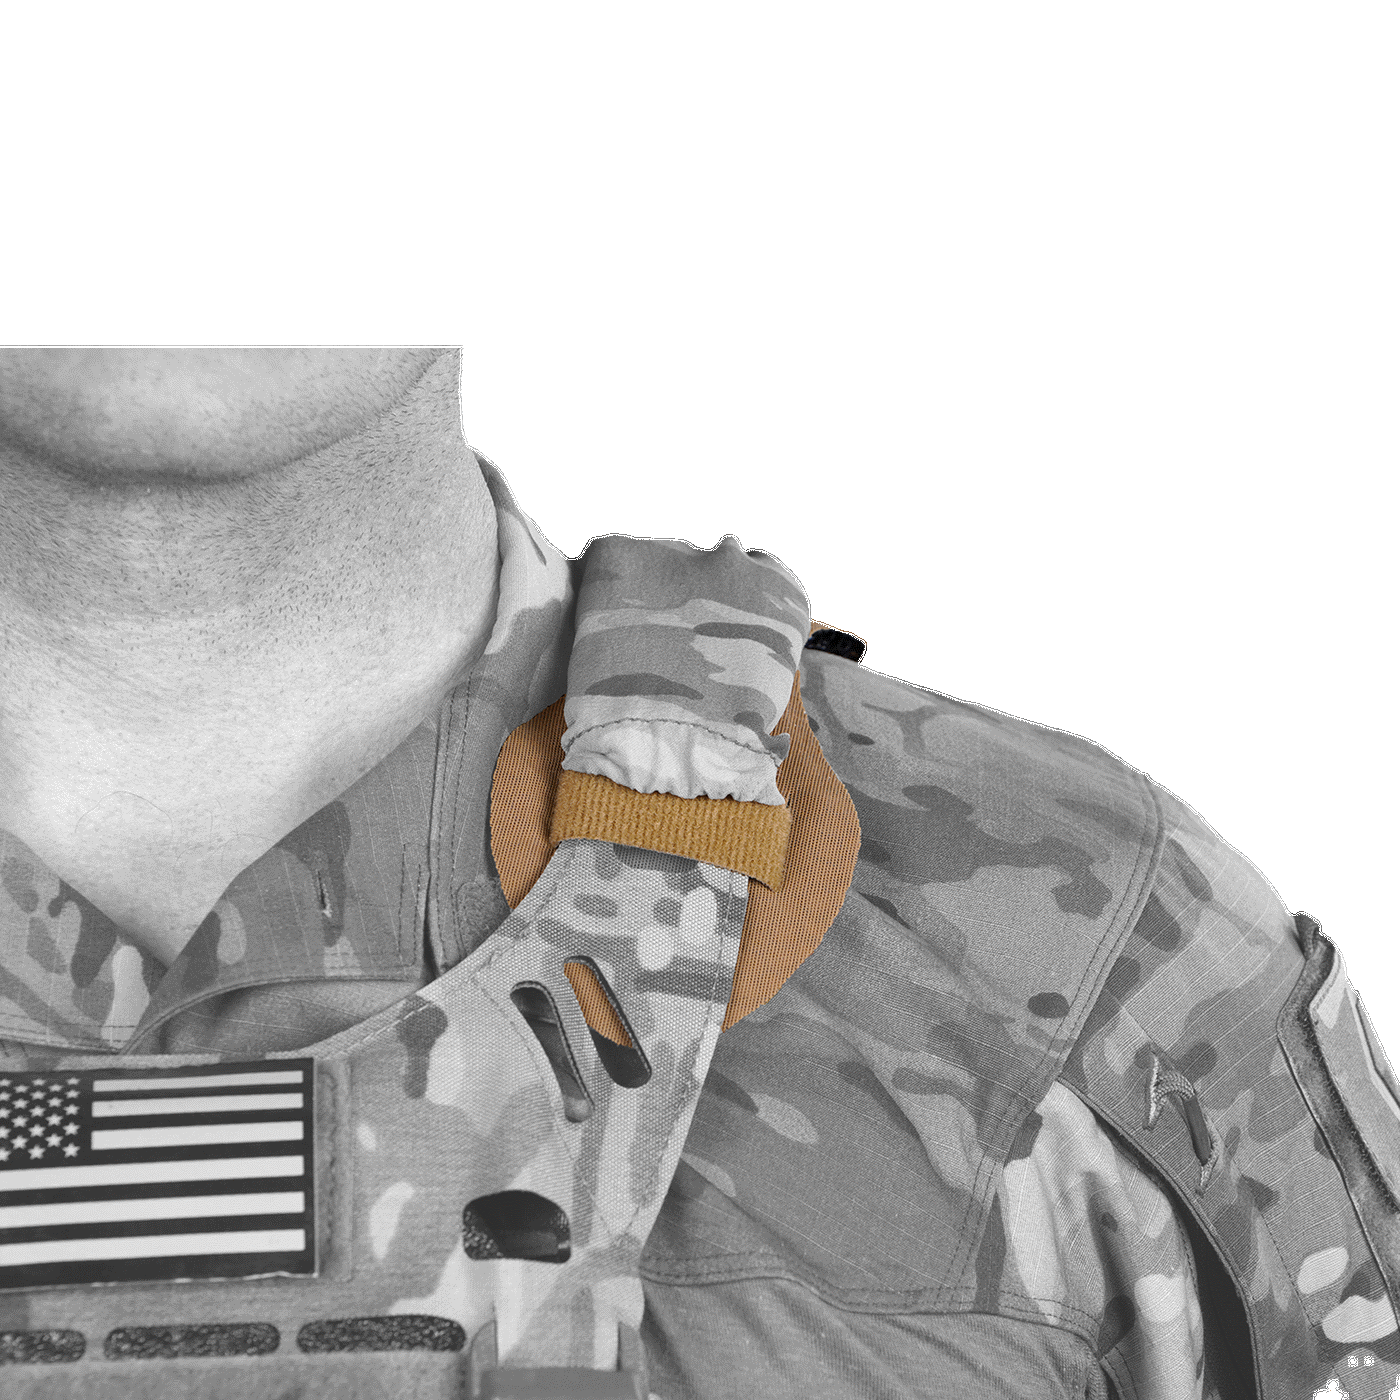 Soft Gear - Plate Carriers - Accessories - SKD Tactical